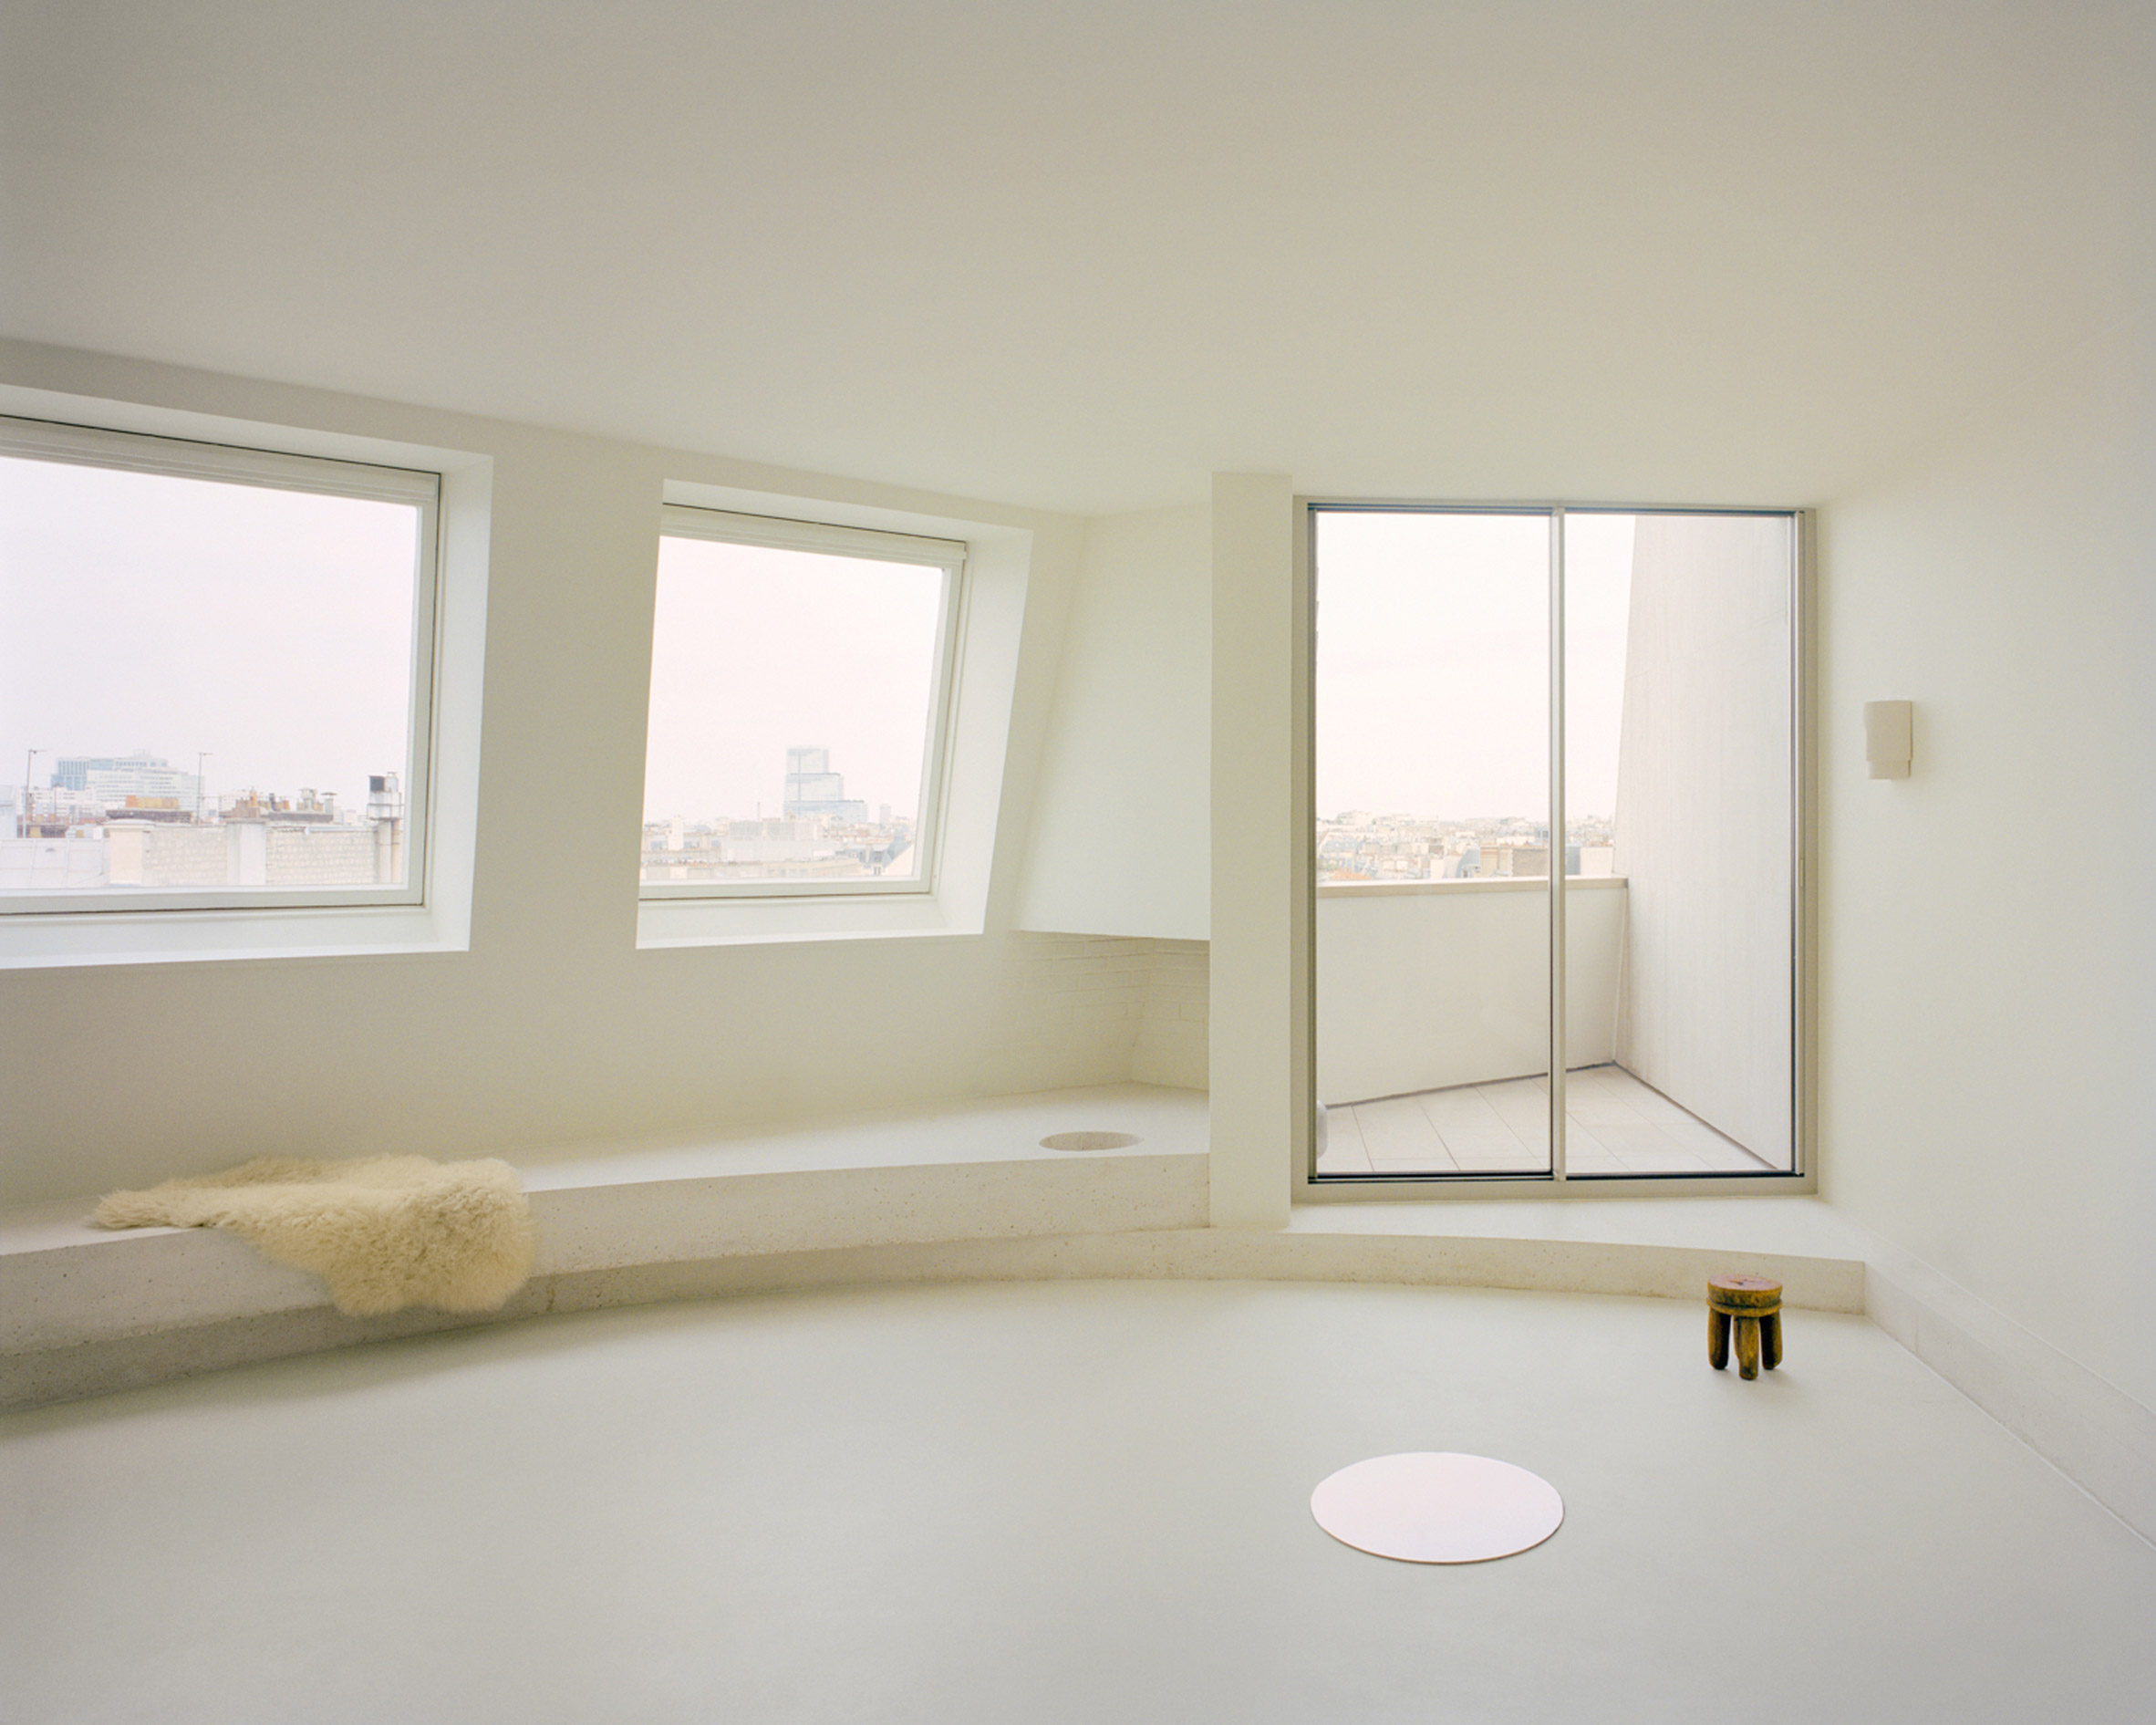 Interior image of a living space at The Edge with views across Paris